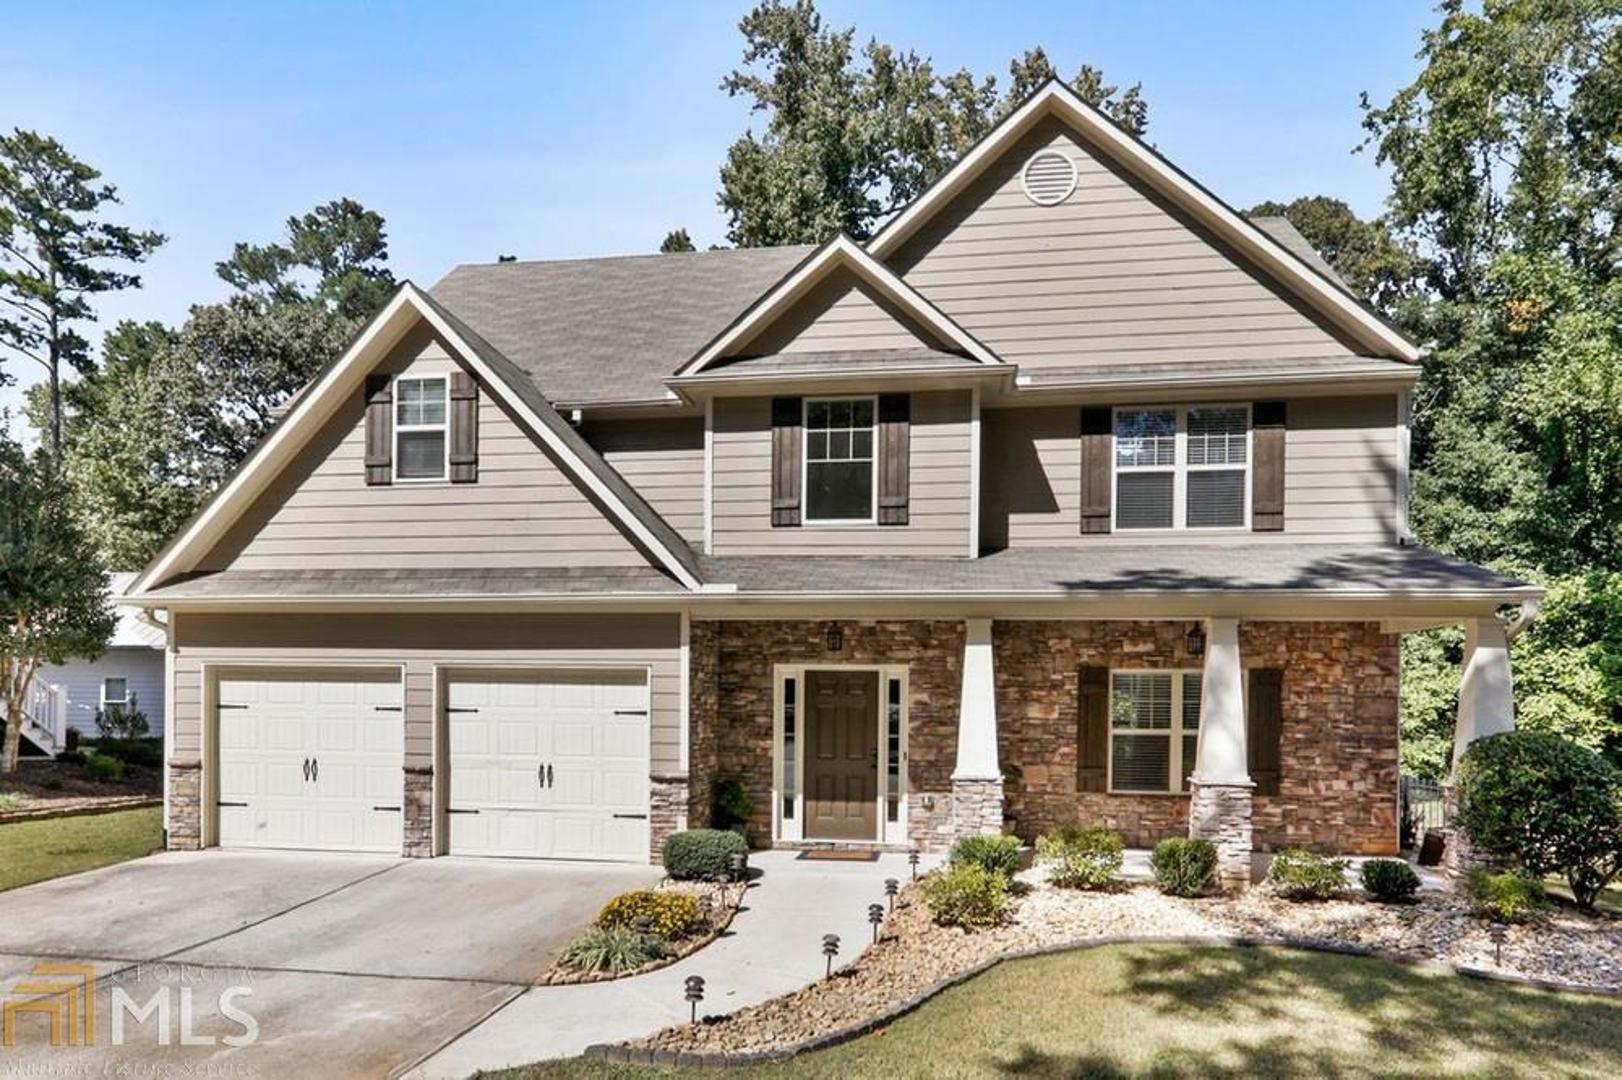 Welcome Home To  3227 Sewell Mill Road. This home has the curb appeal you've  been looking for.